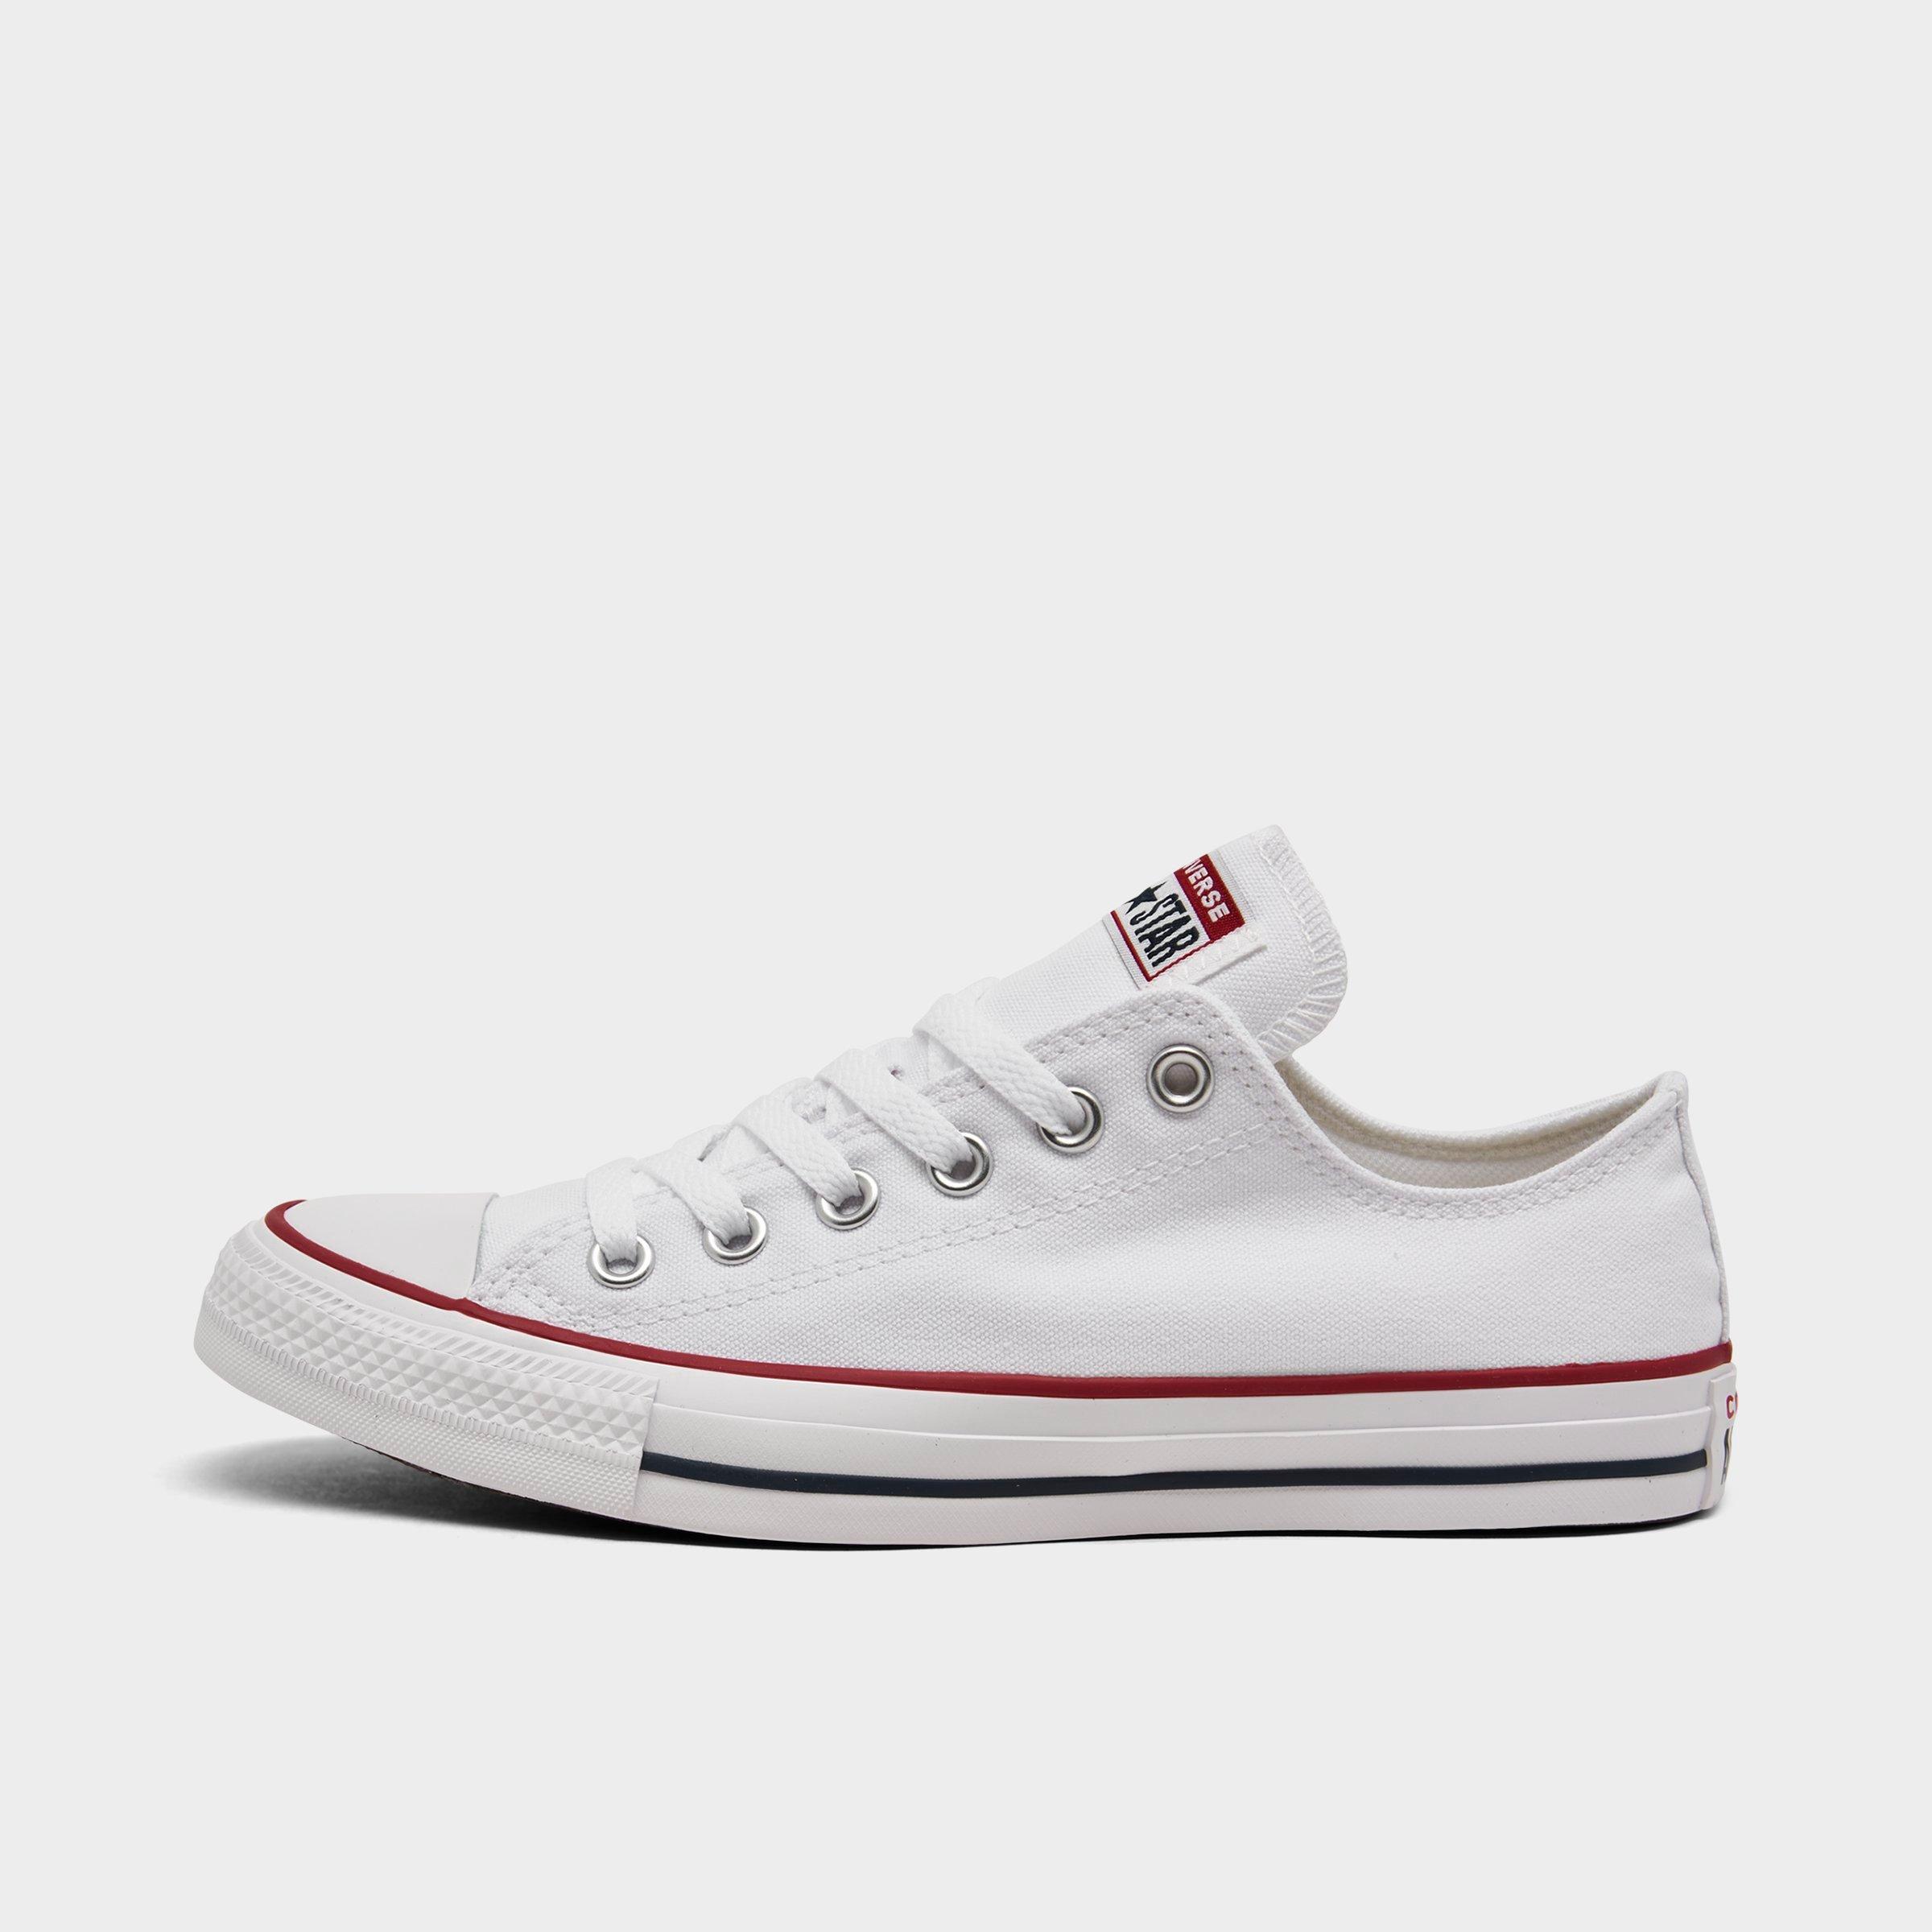 converse product line